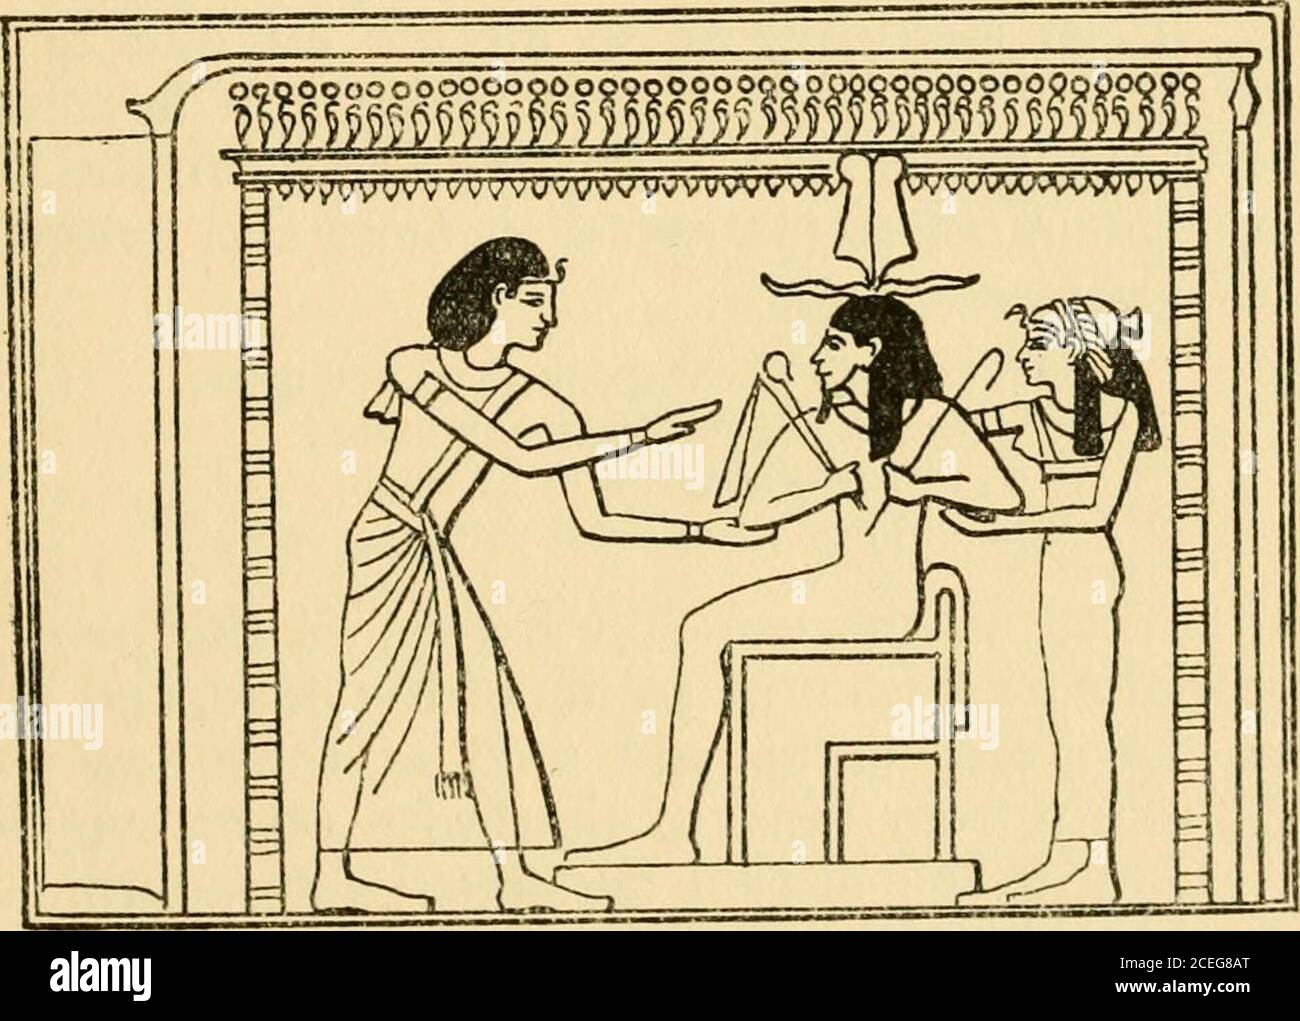 . Osiris and the Egyptian resurrection;. Seti I opening the door of the shrine of Osiris.Marietta, Abydos, Vol. I, p. 59.. Seti I addressing Osiris-Seker in his shrine.Marietta, Abydos, Vol. I, p. 44. among the Bahima resembles that in use among thepeople of Unyoro. Many of the names of evilly-disposed ancestral spirits are identical with the names fordiseases, and it seems as if certain diseases are believedto be sent by spirits whom the living have offended.^1 Johnston, Uganda, Vol. II, p. 631. 270 Osiris and the Egyptian Resurrection On the amulets worn in Abyssinia the persons forwhom they Stock Photo